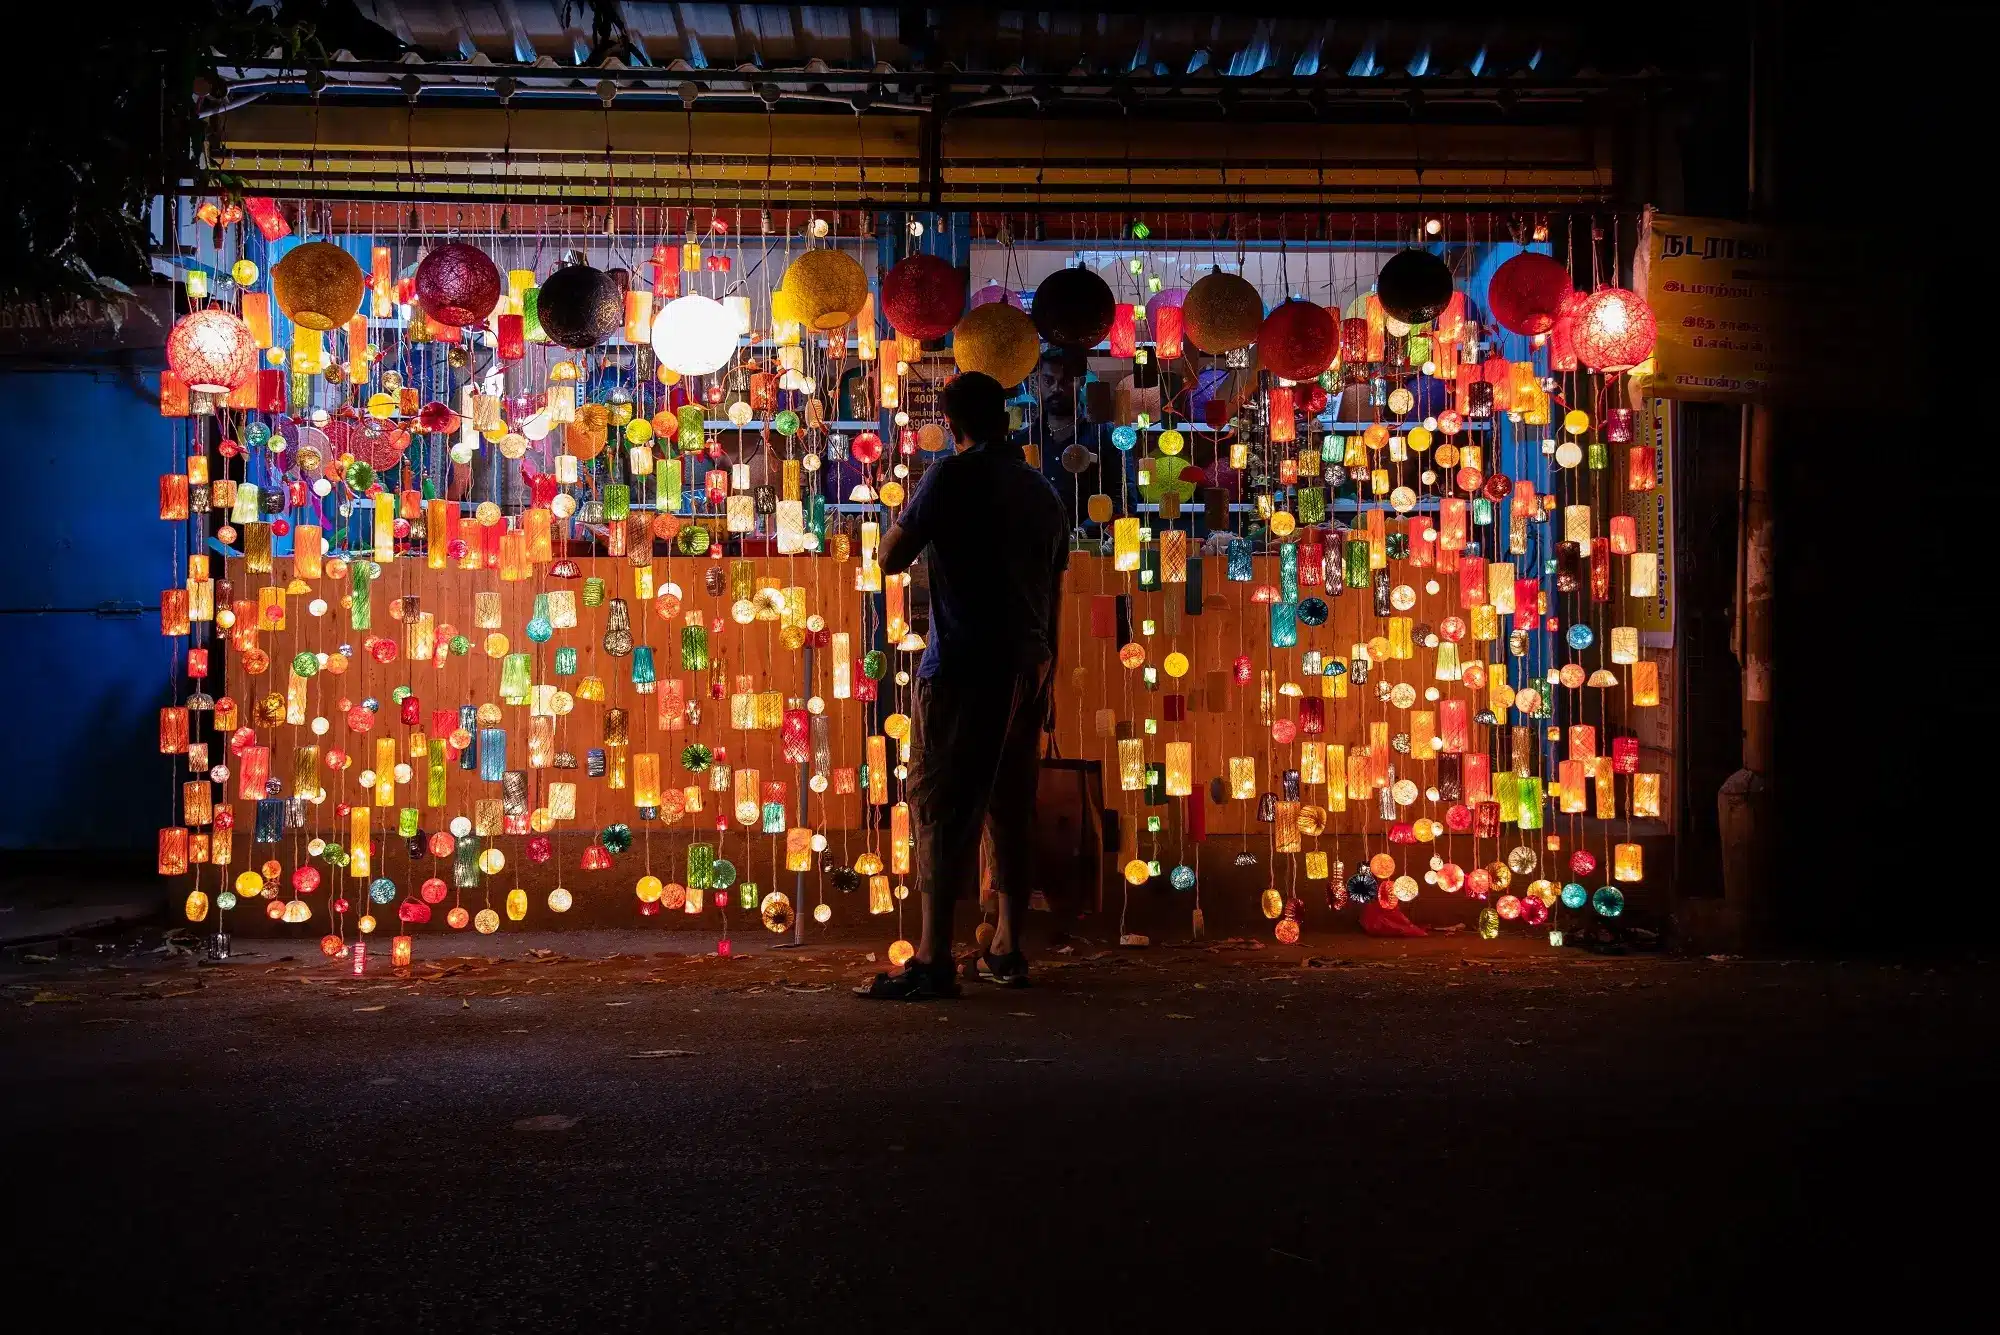 A man looking at a lantern display in a market stall, representing the concept of GST input tax credits.